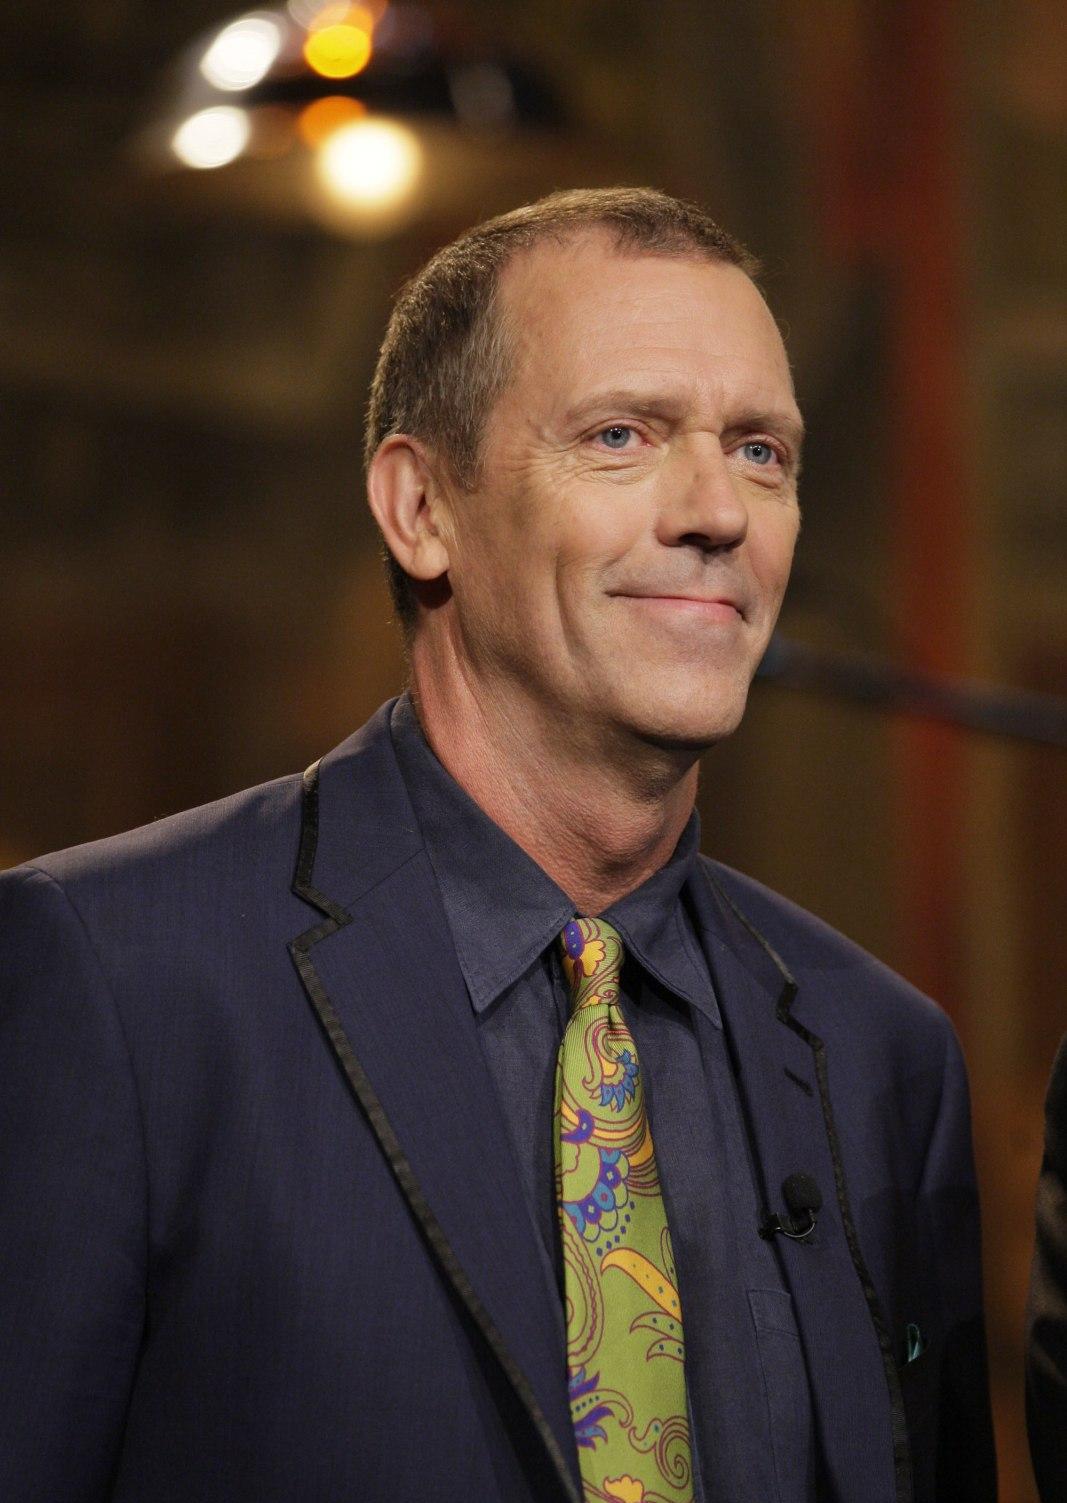 Hugh Laurie on The Tonight Show with Jay Leno - May 2012 